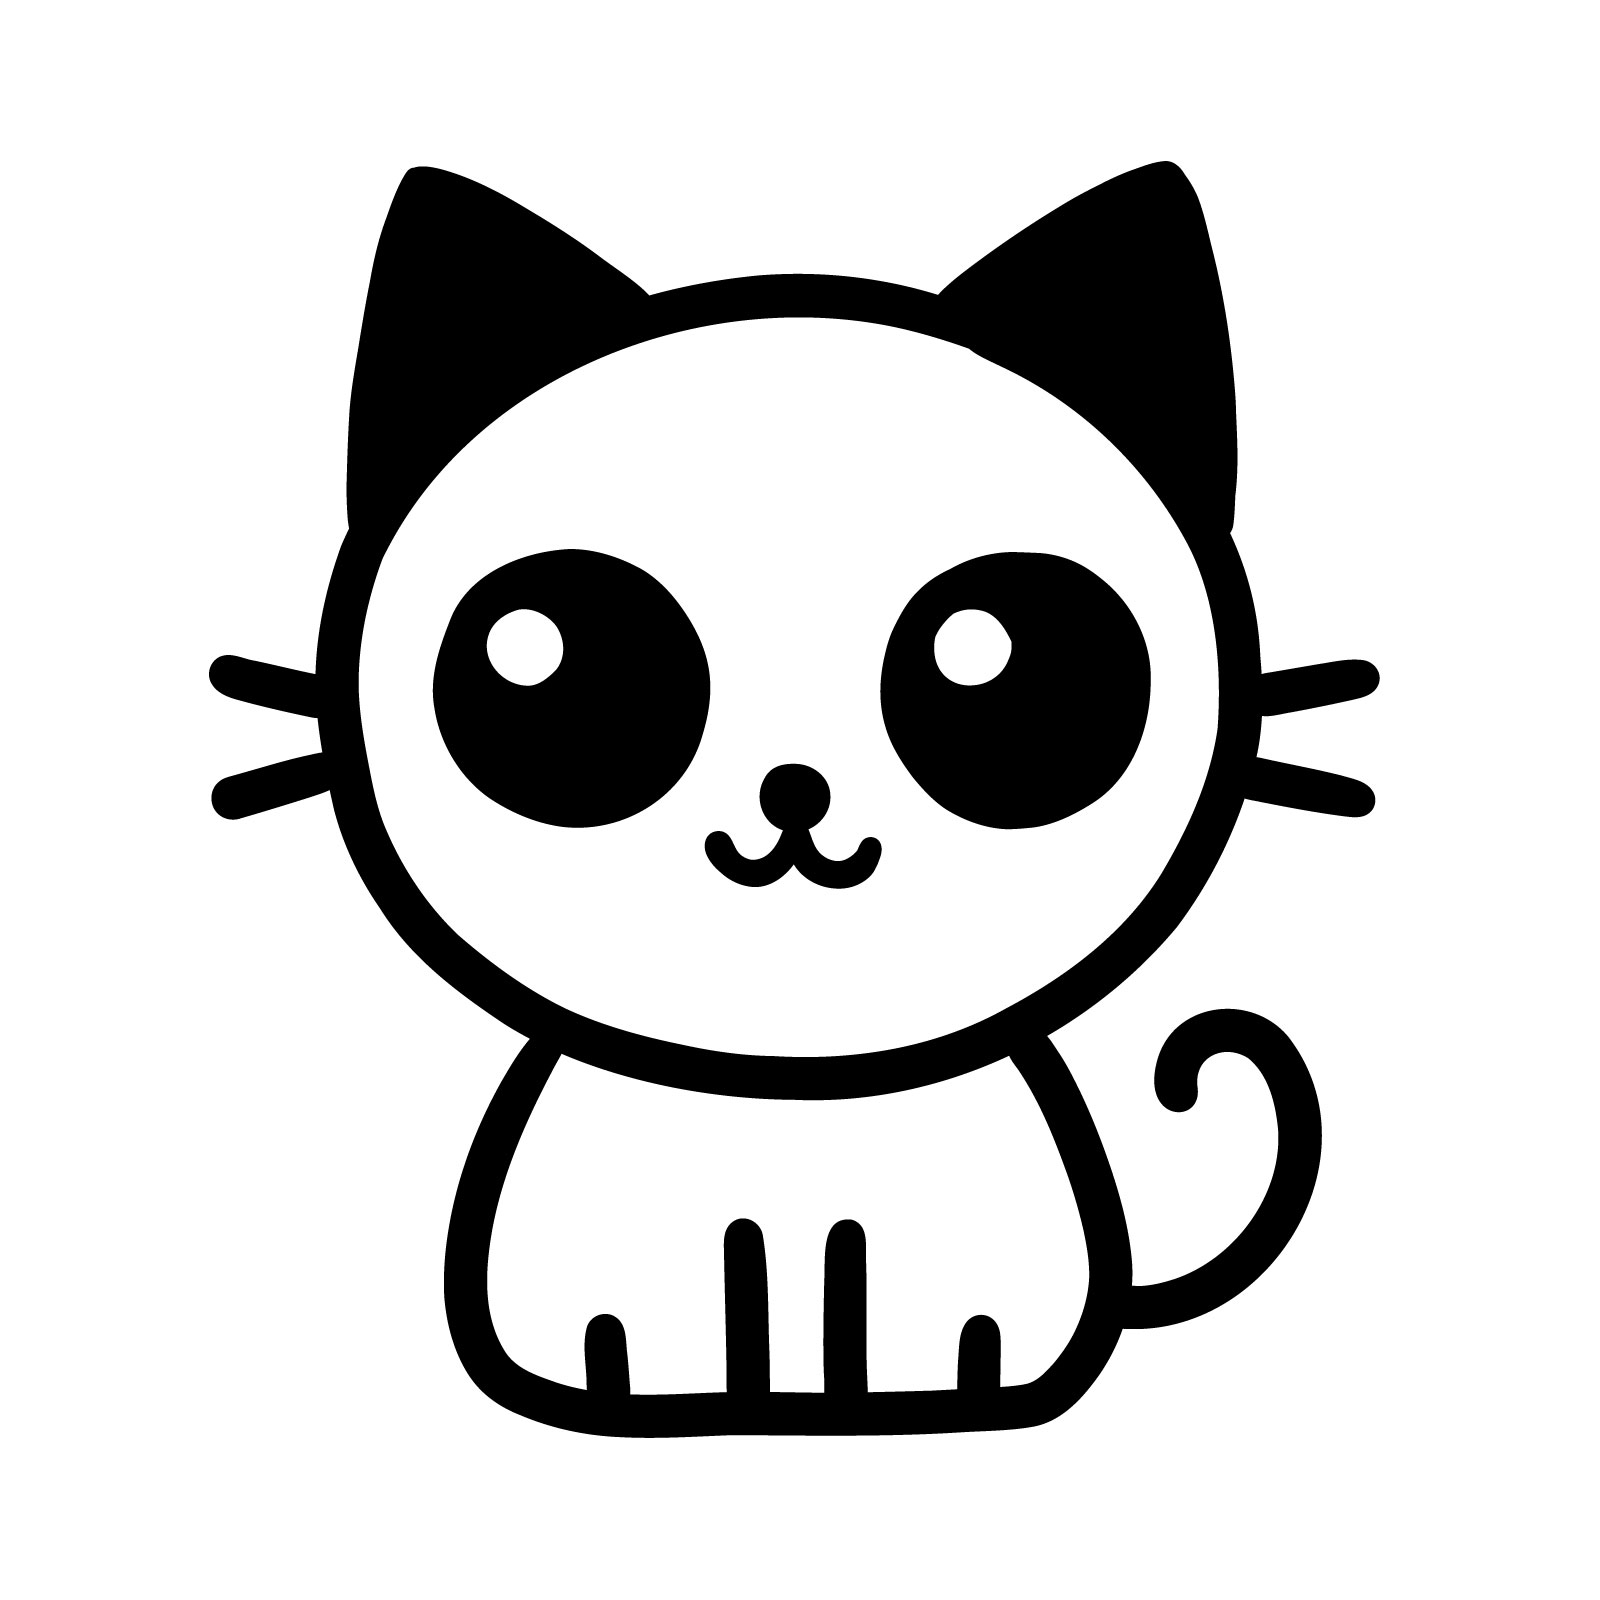 How to draw a cat | Creative Bloq